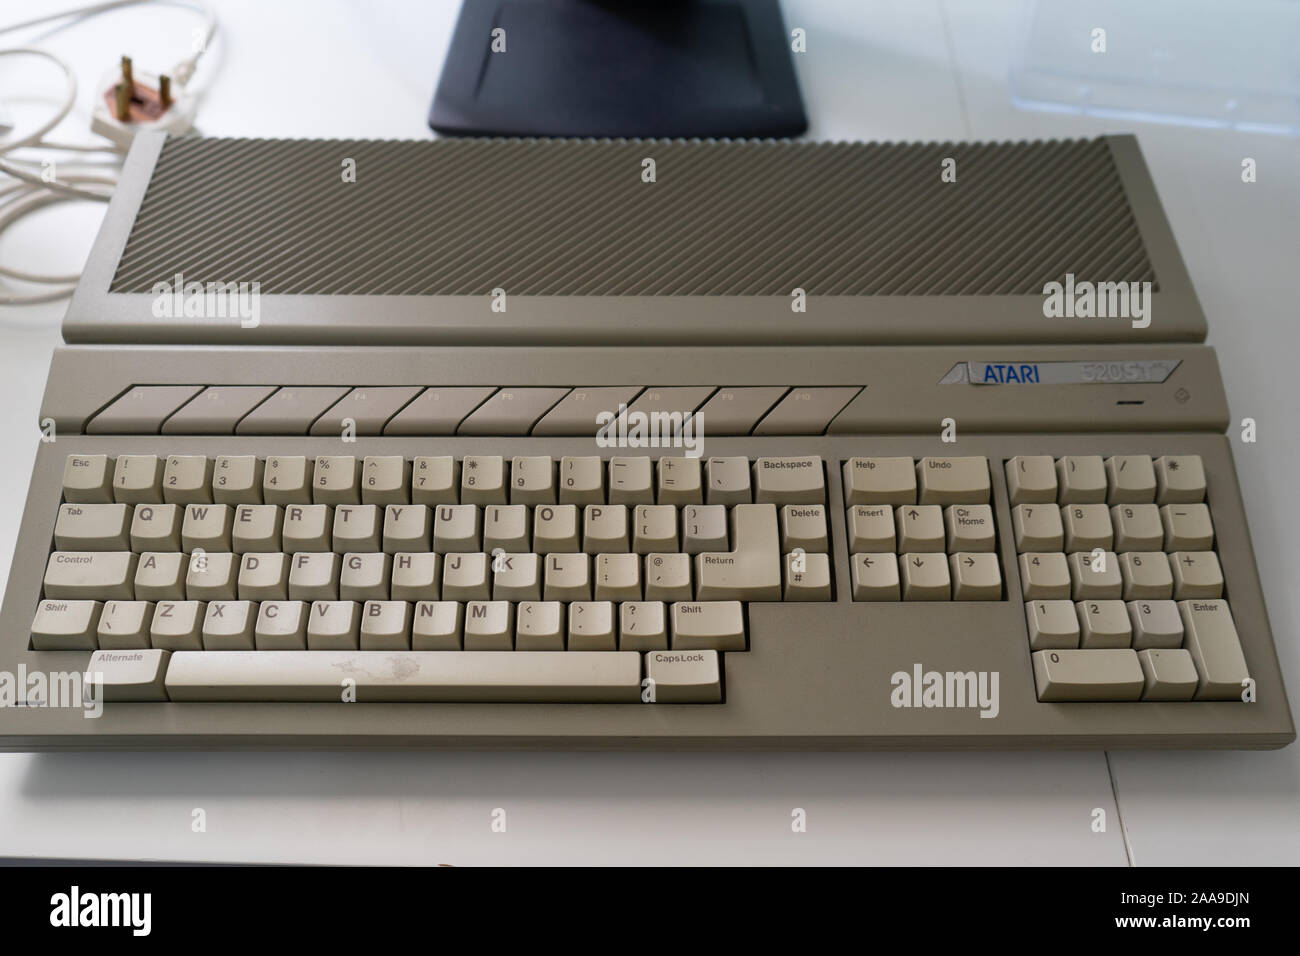 An Atari 520st personal home computer, a vintage PC from the 1980's Stock Photo